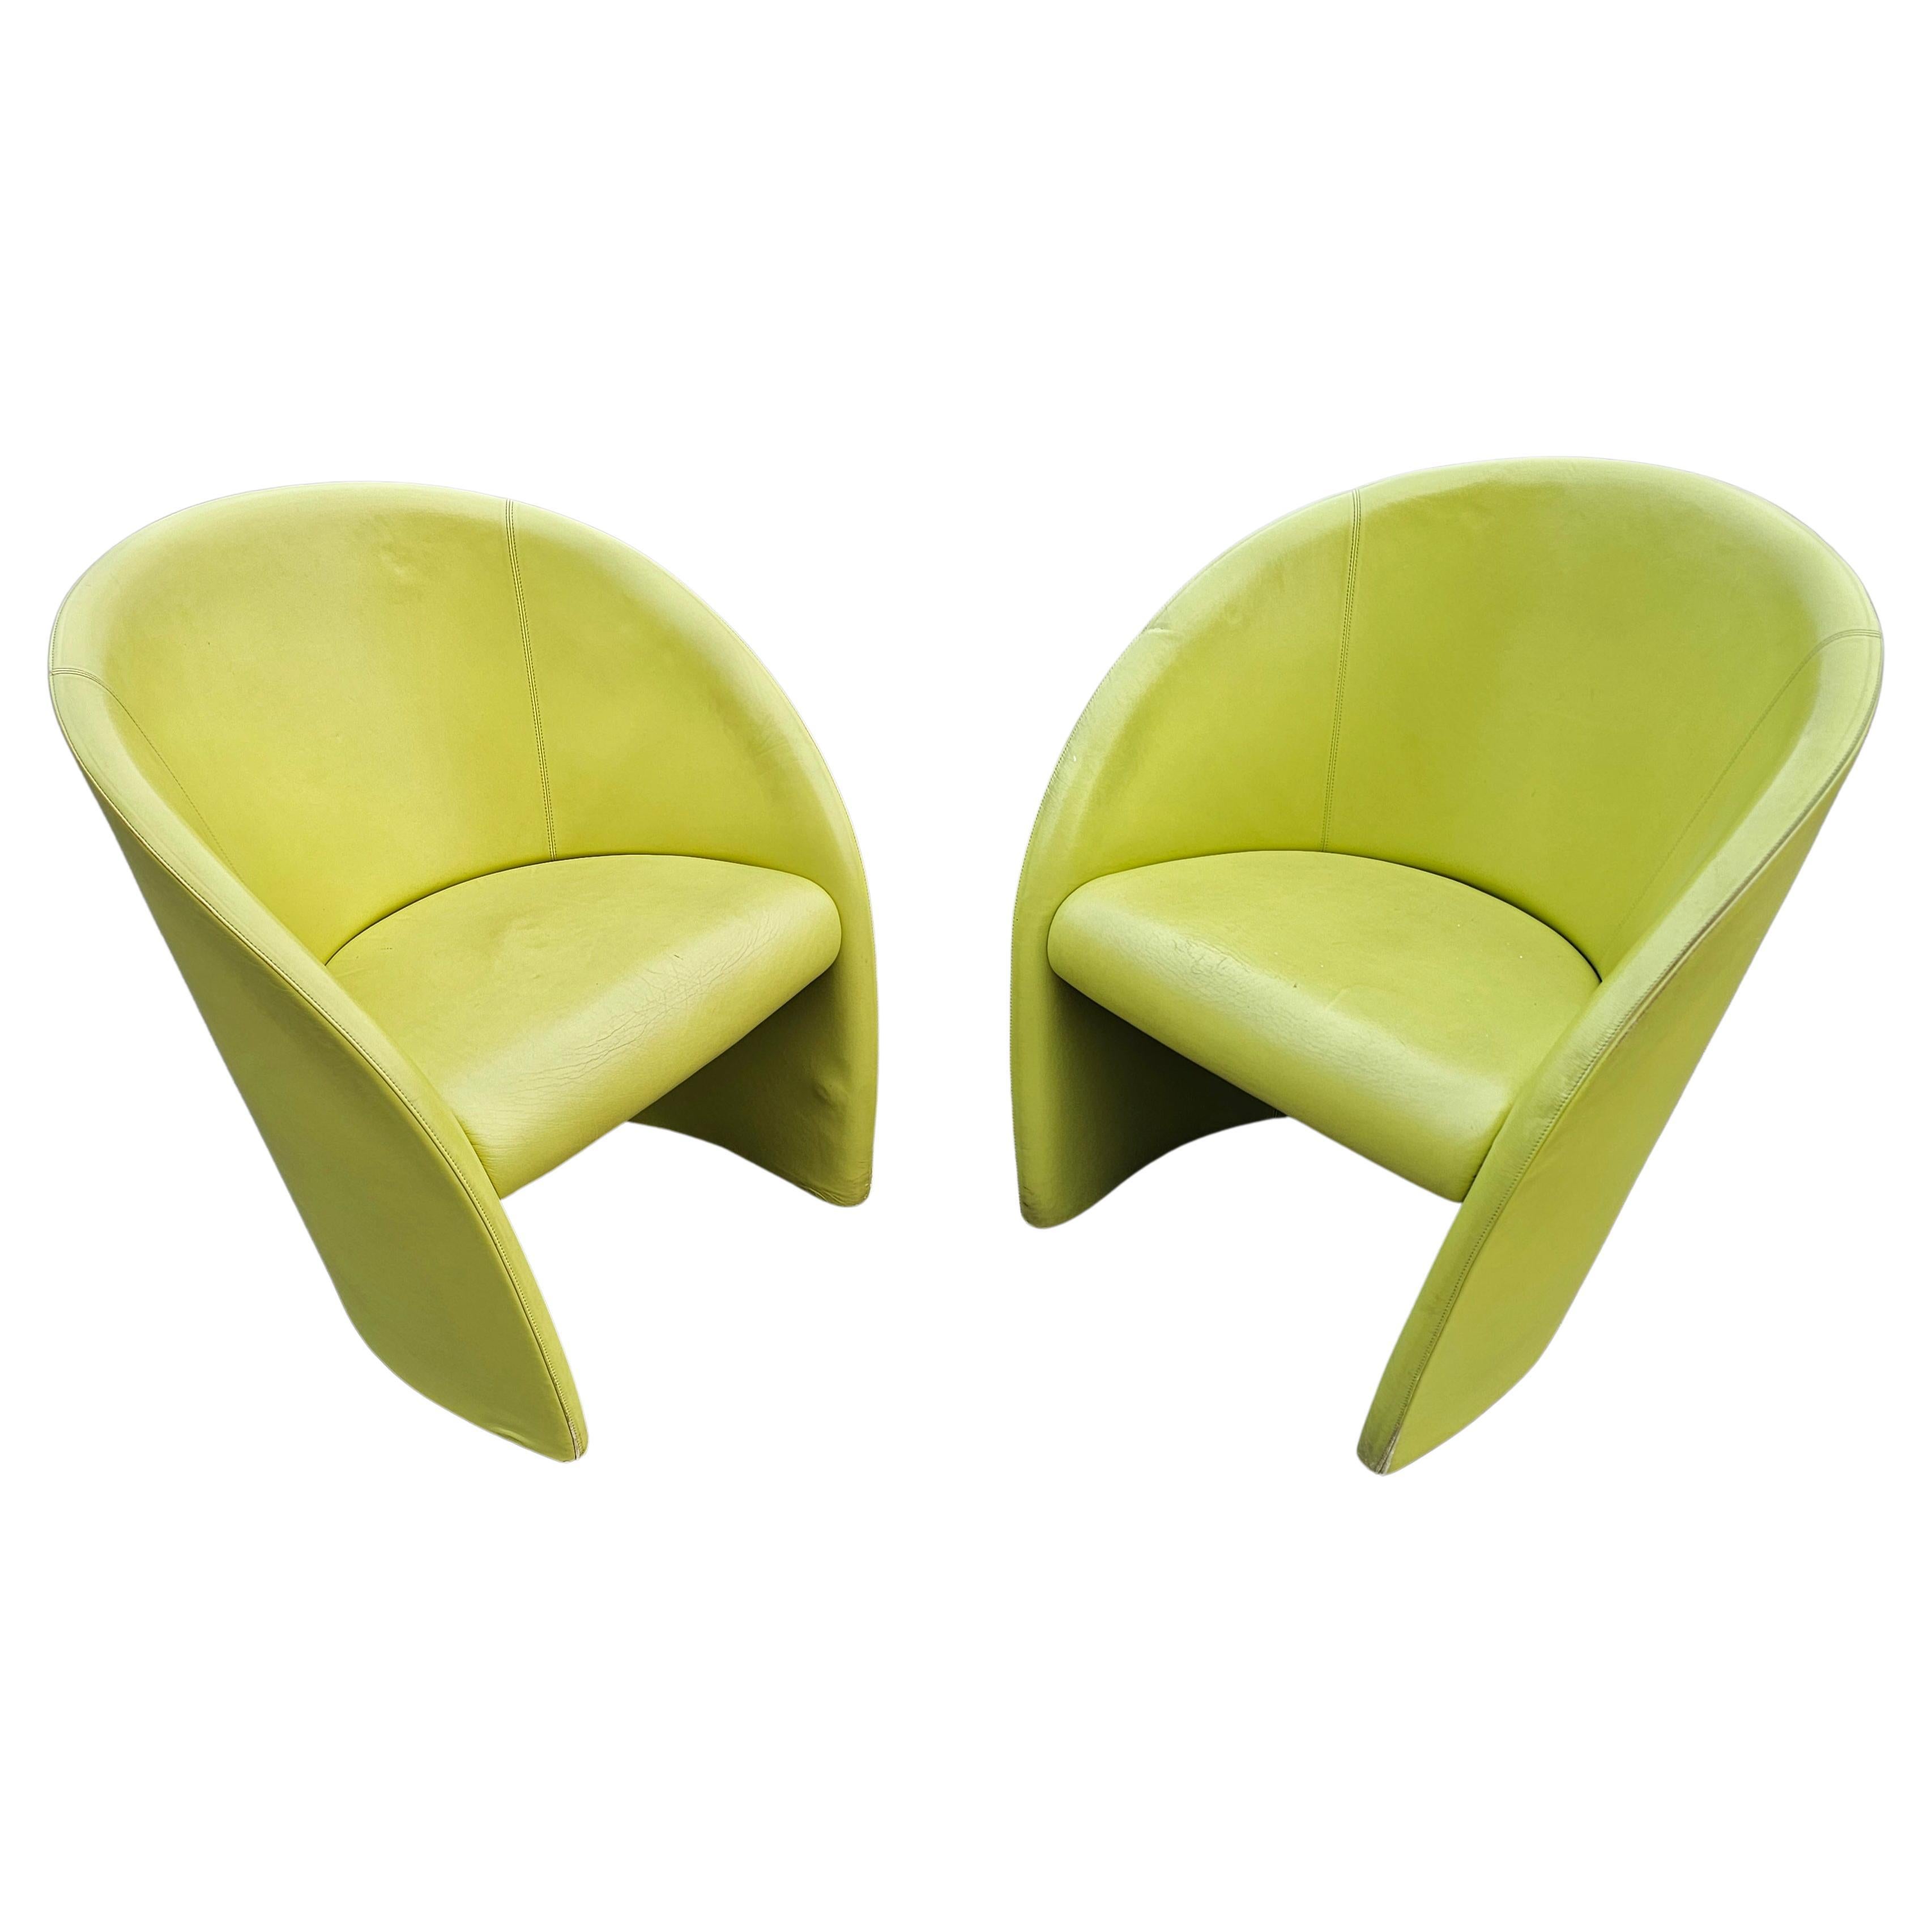 1 of 5 Intervista Club Chairs by Poltrona Frau in Chartreuse Leather, Italy 1989 For Sale